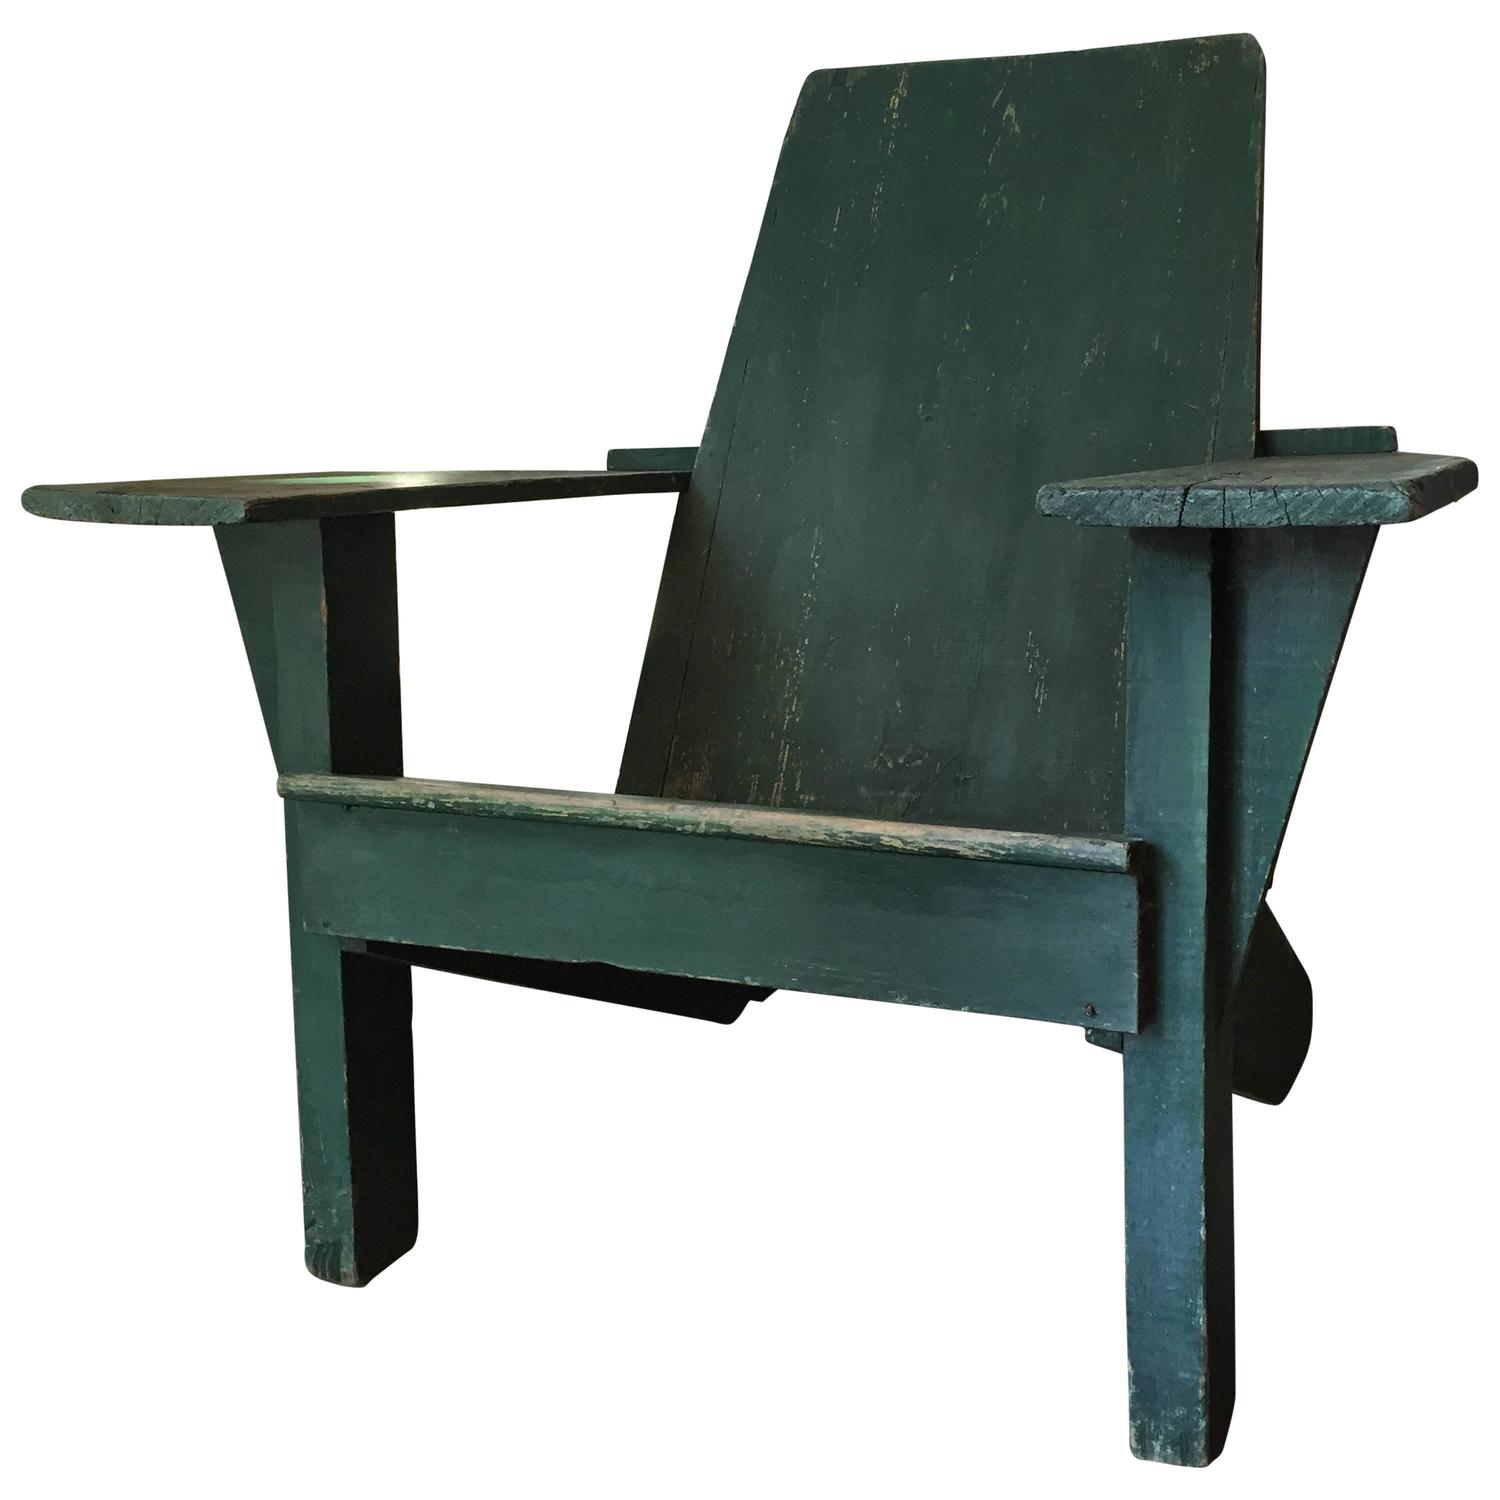 Antique American Adirondack Chair For Sale at 1stdibs